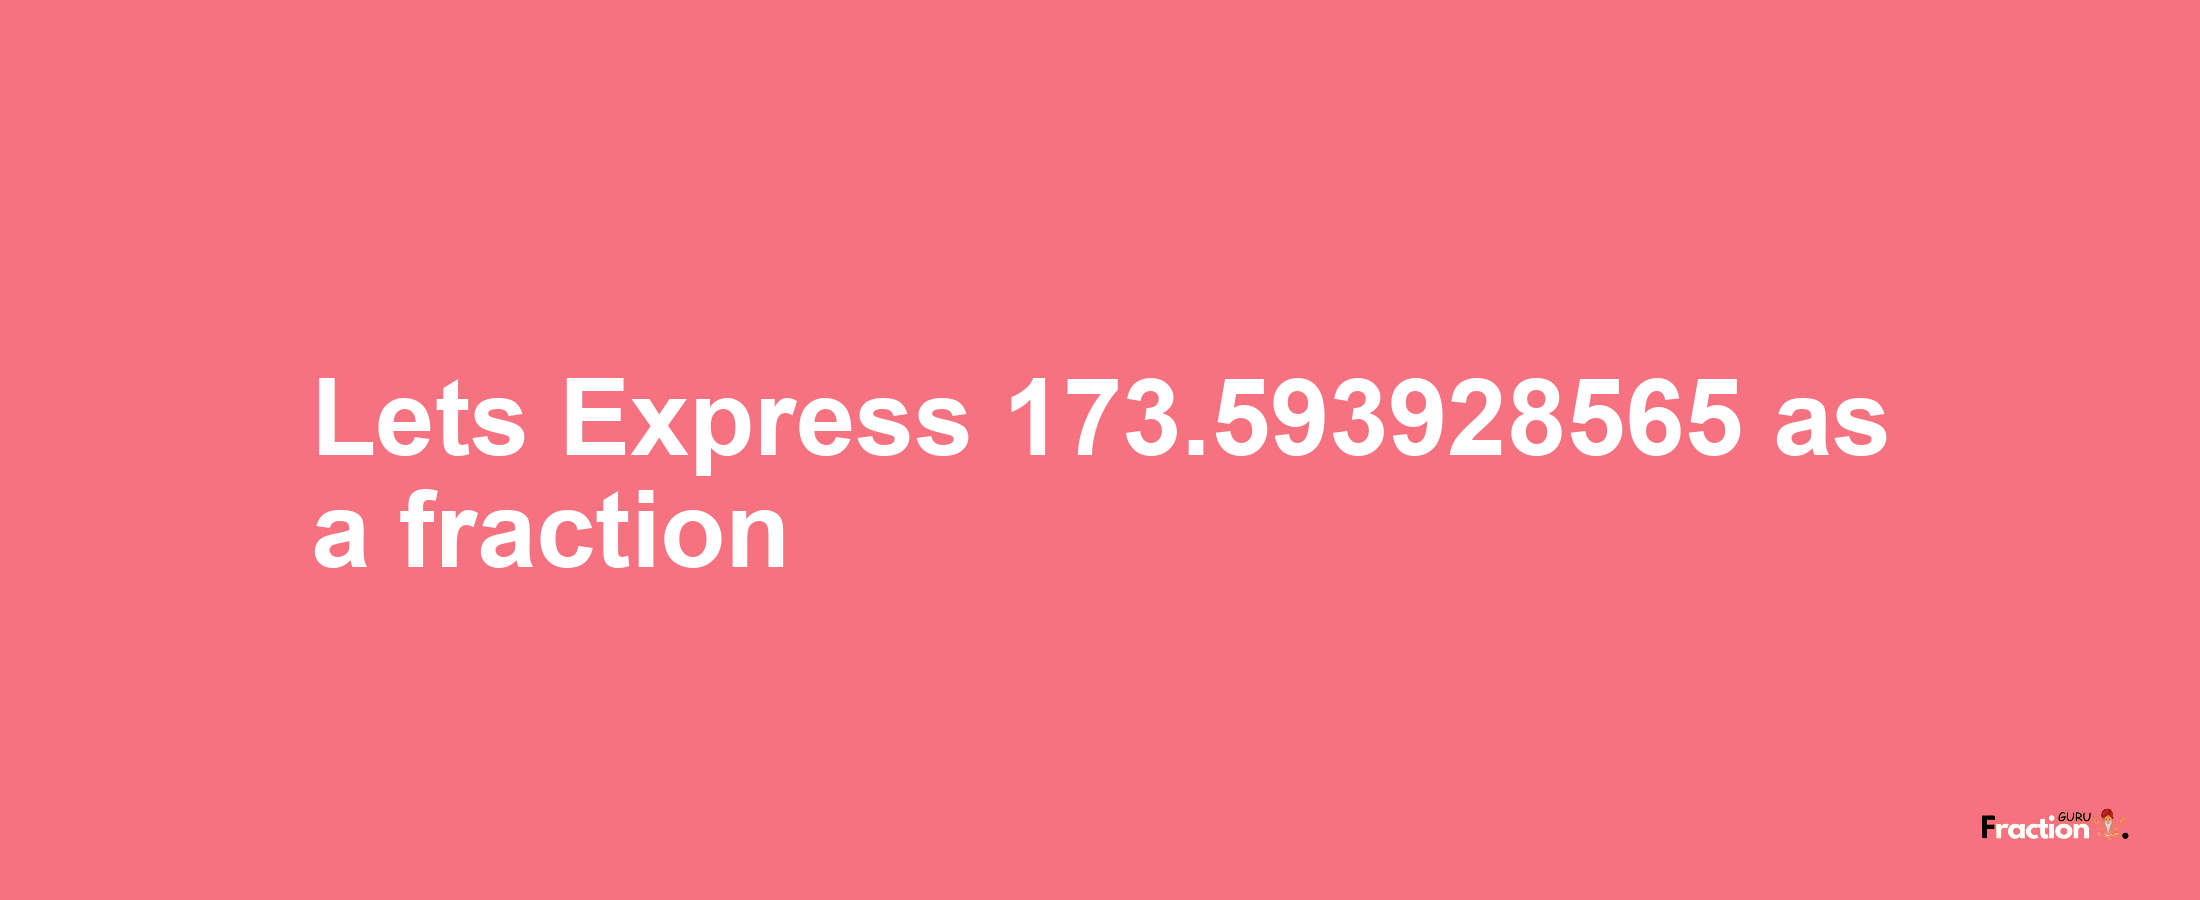 Lets Express 173.593928565 as afraction